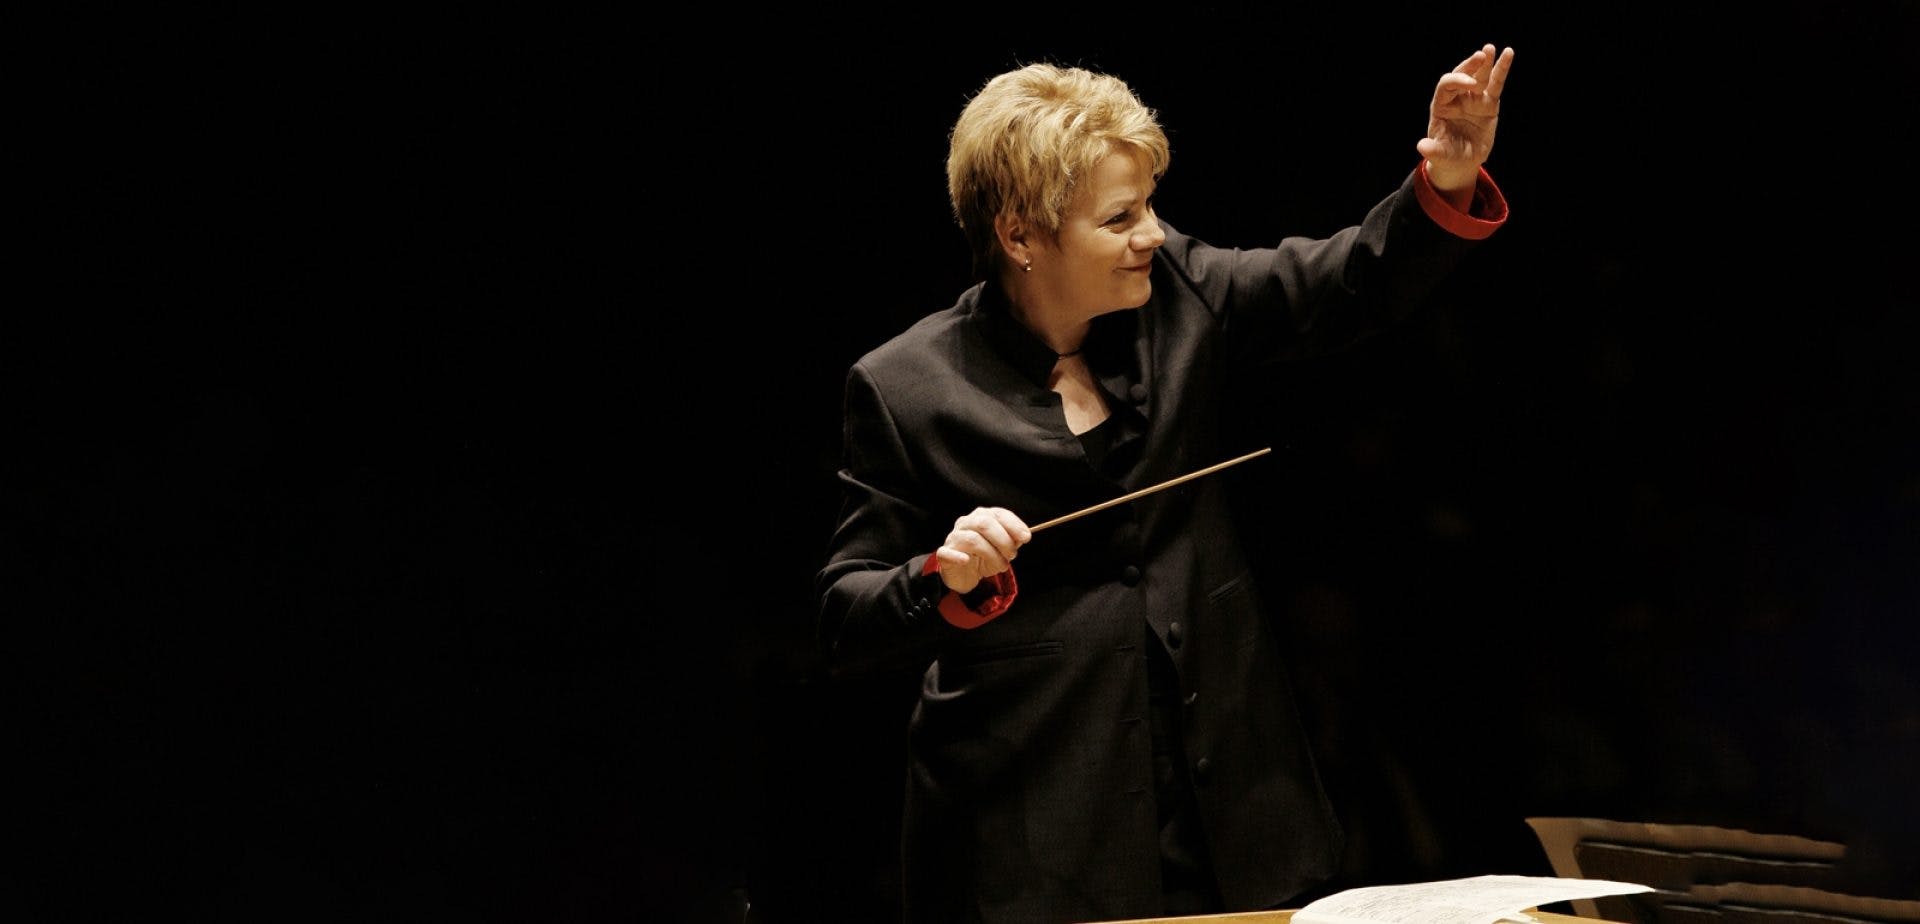 Marin Alsop conducts the Concertgebouw Orchestra in Adams and Bartók